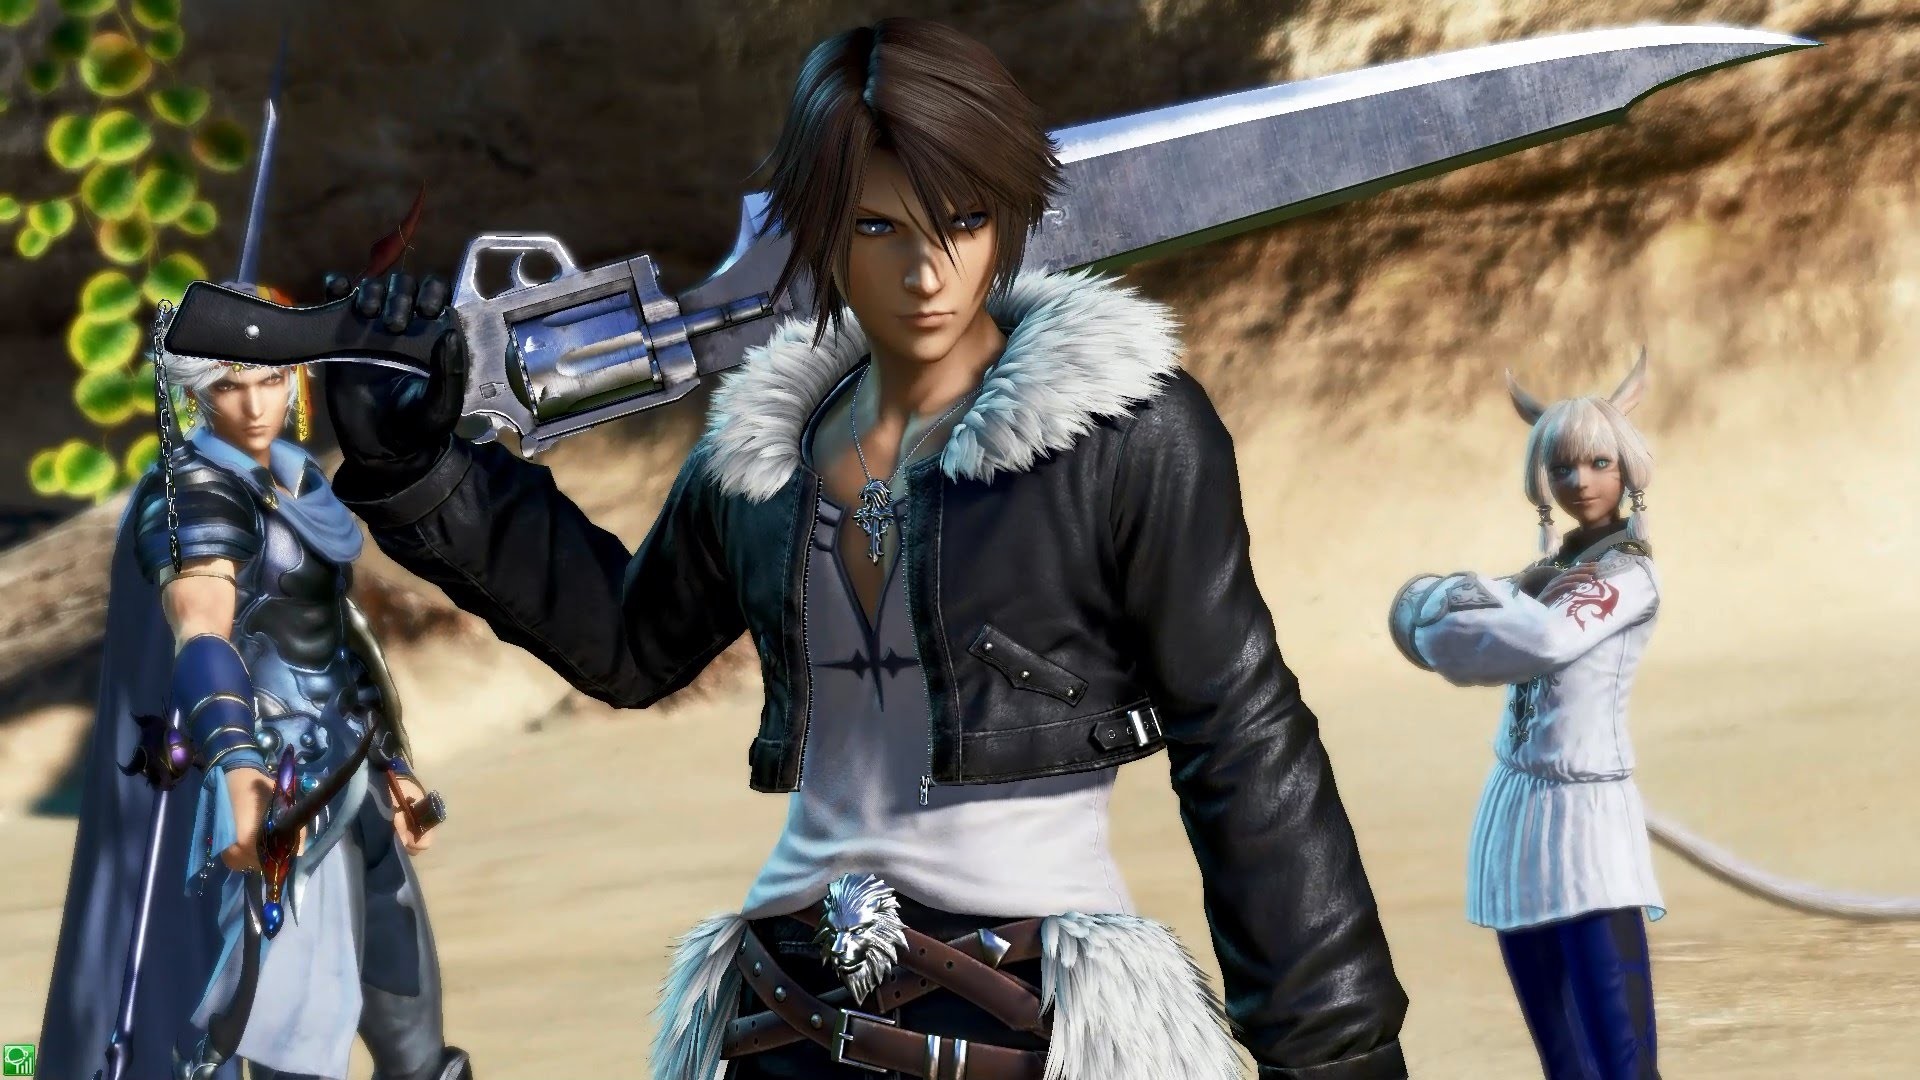 1920x1080 Squall Leonhart is the main protagonist of Final Fantasy VIII ...